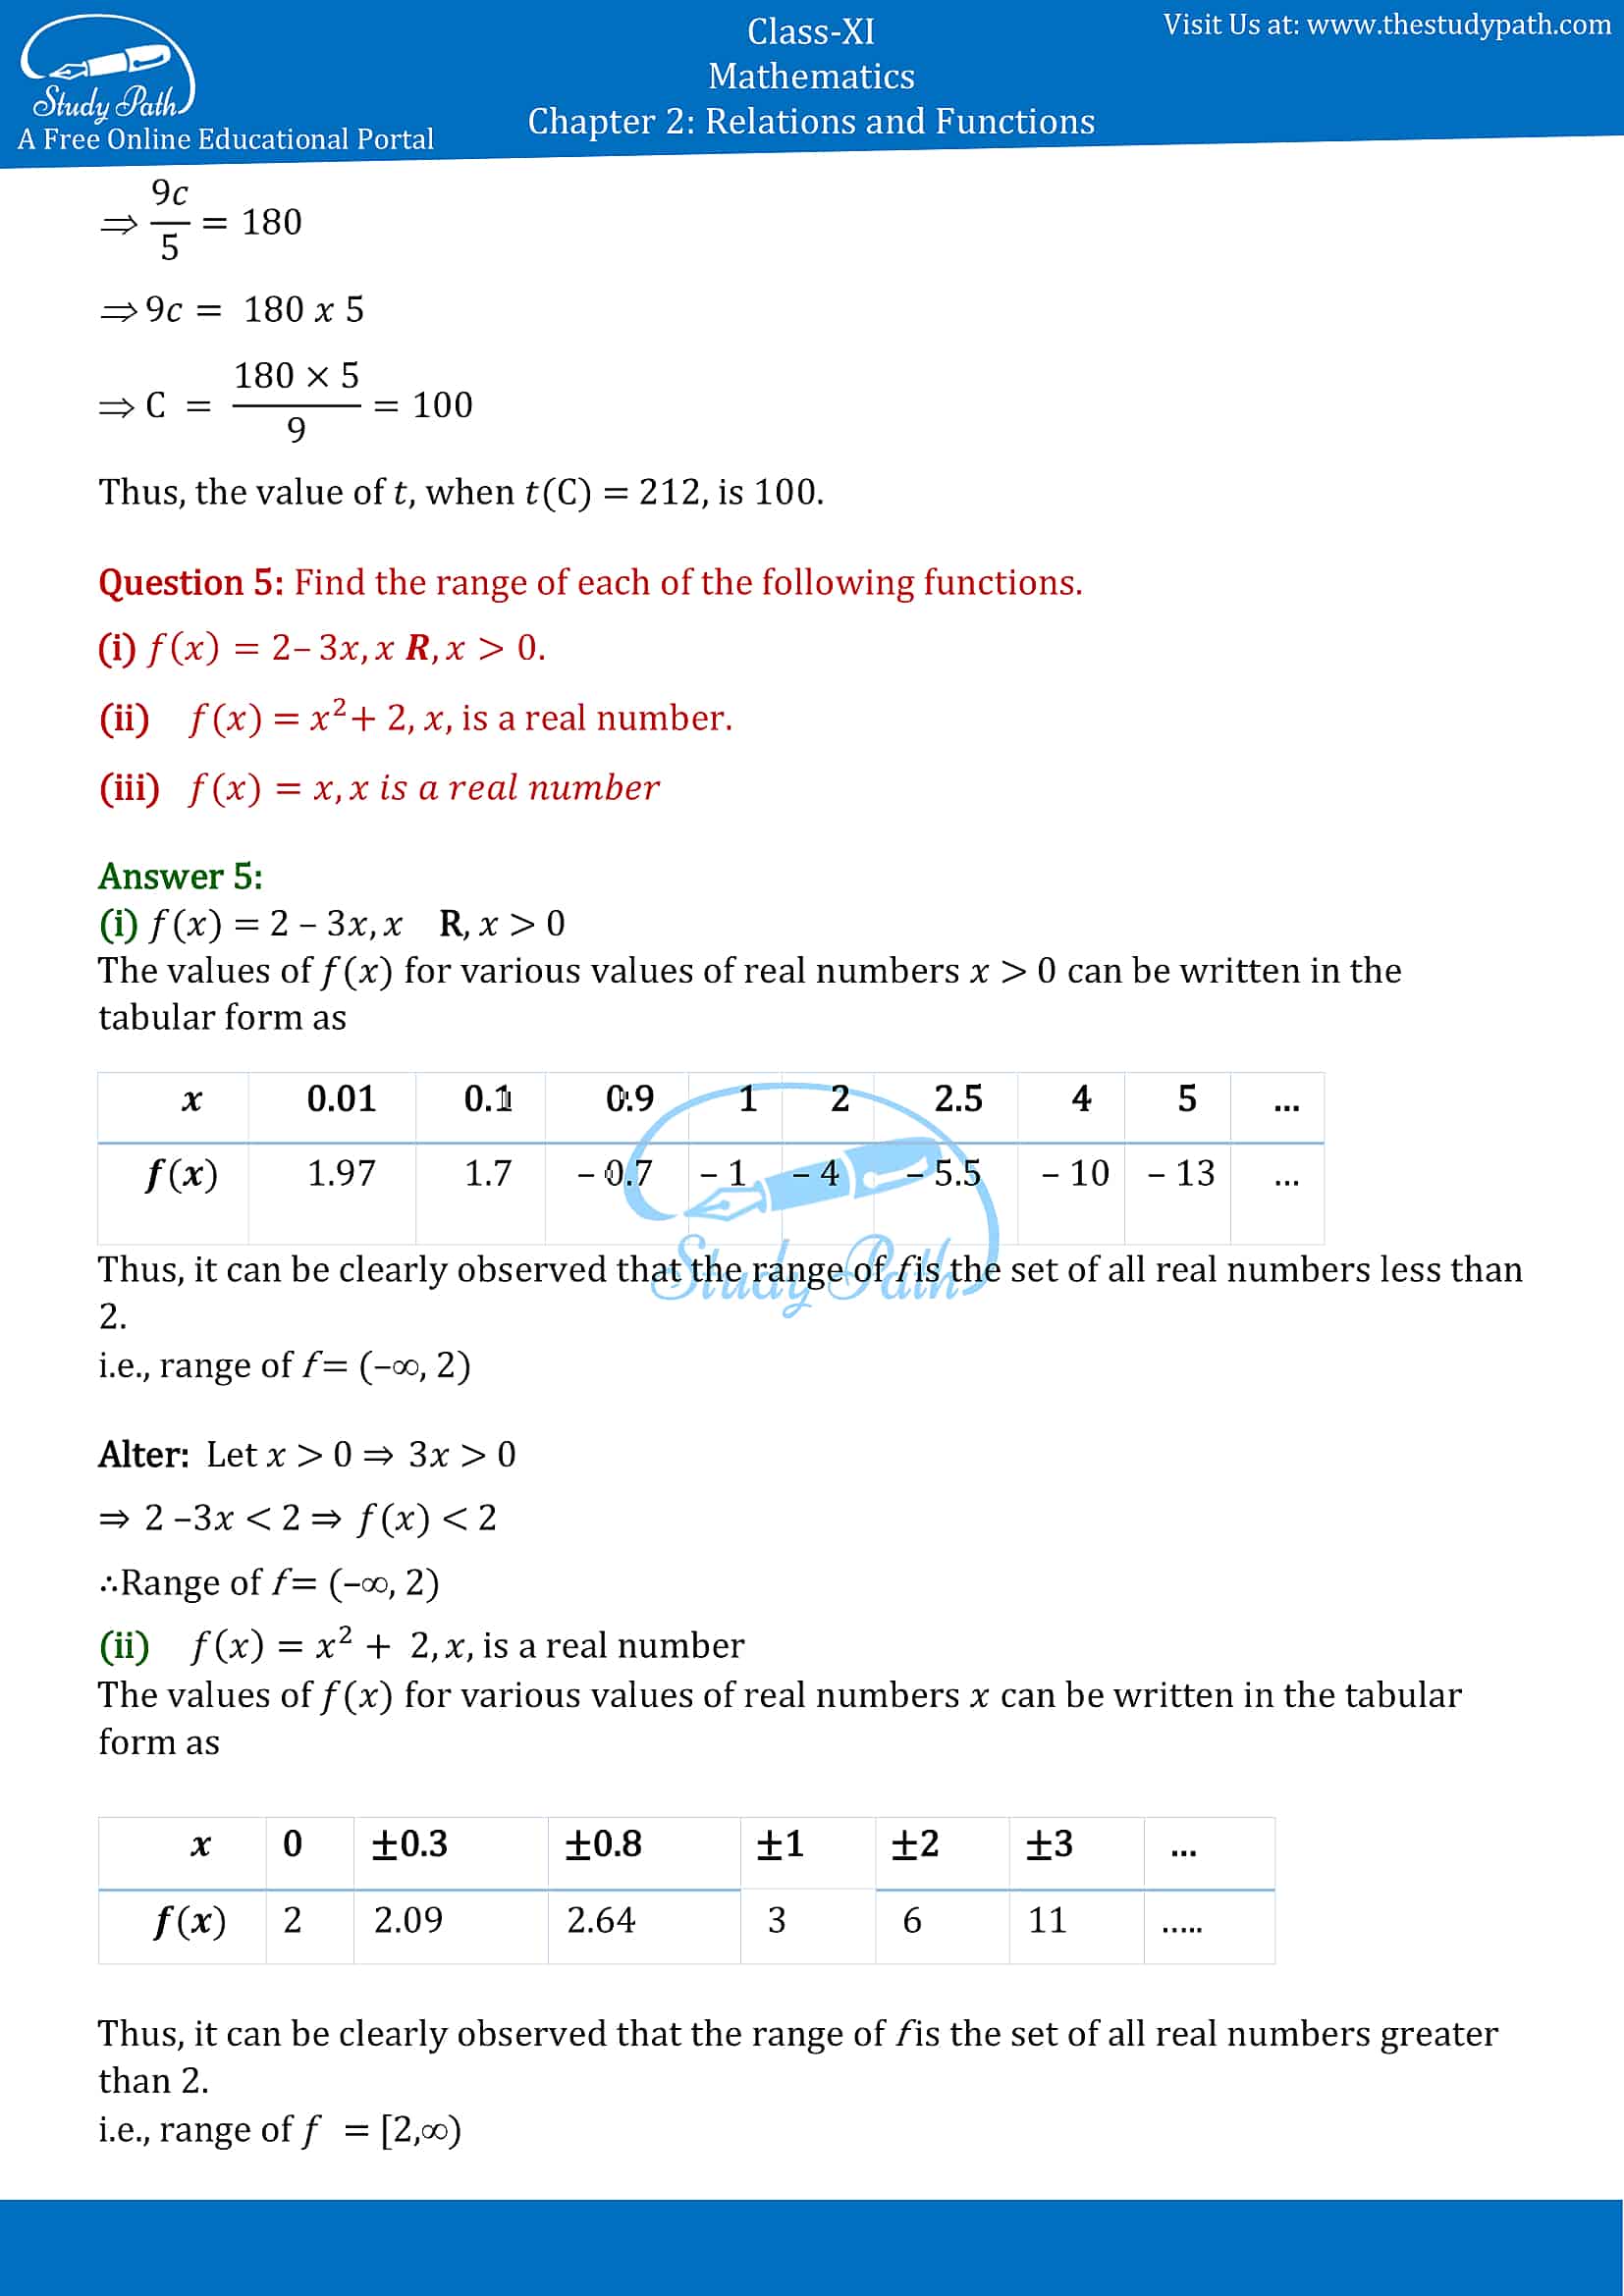 relation and function class 11 assignment